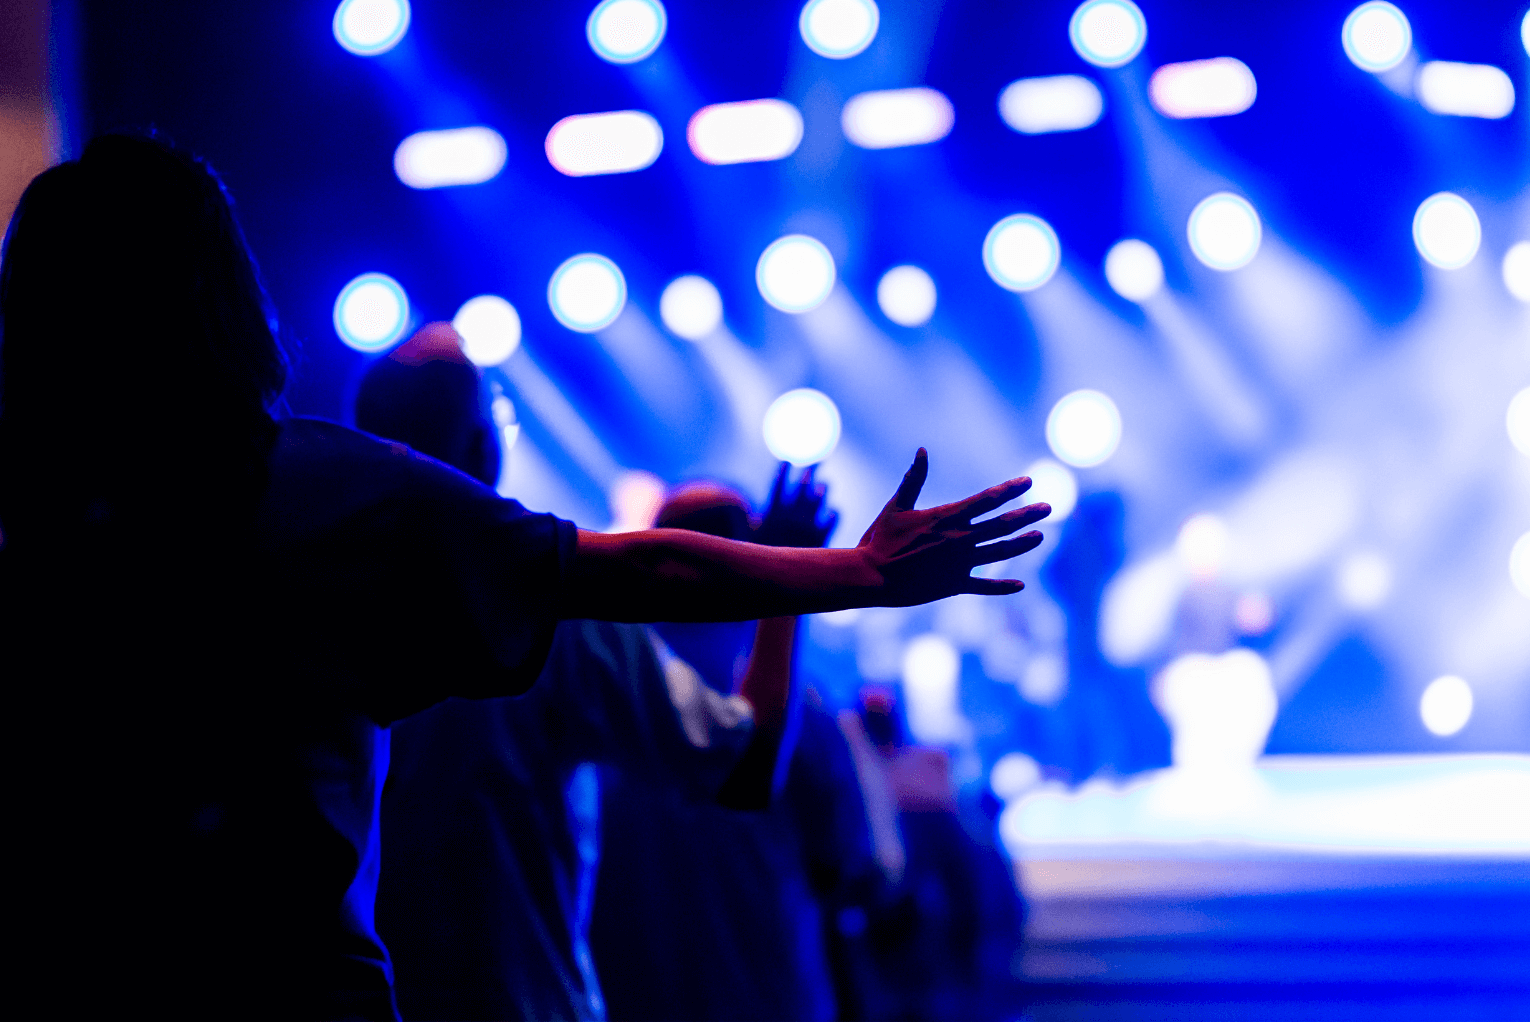 Megachurch Temporarily Shuts After Insurance and Misconduct Allegation Woes